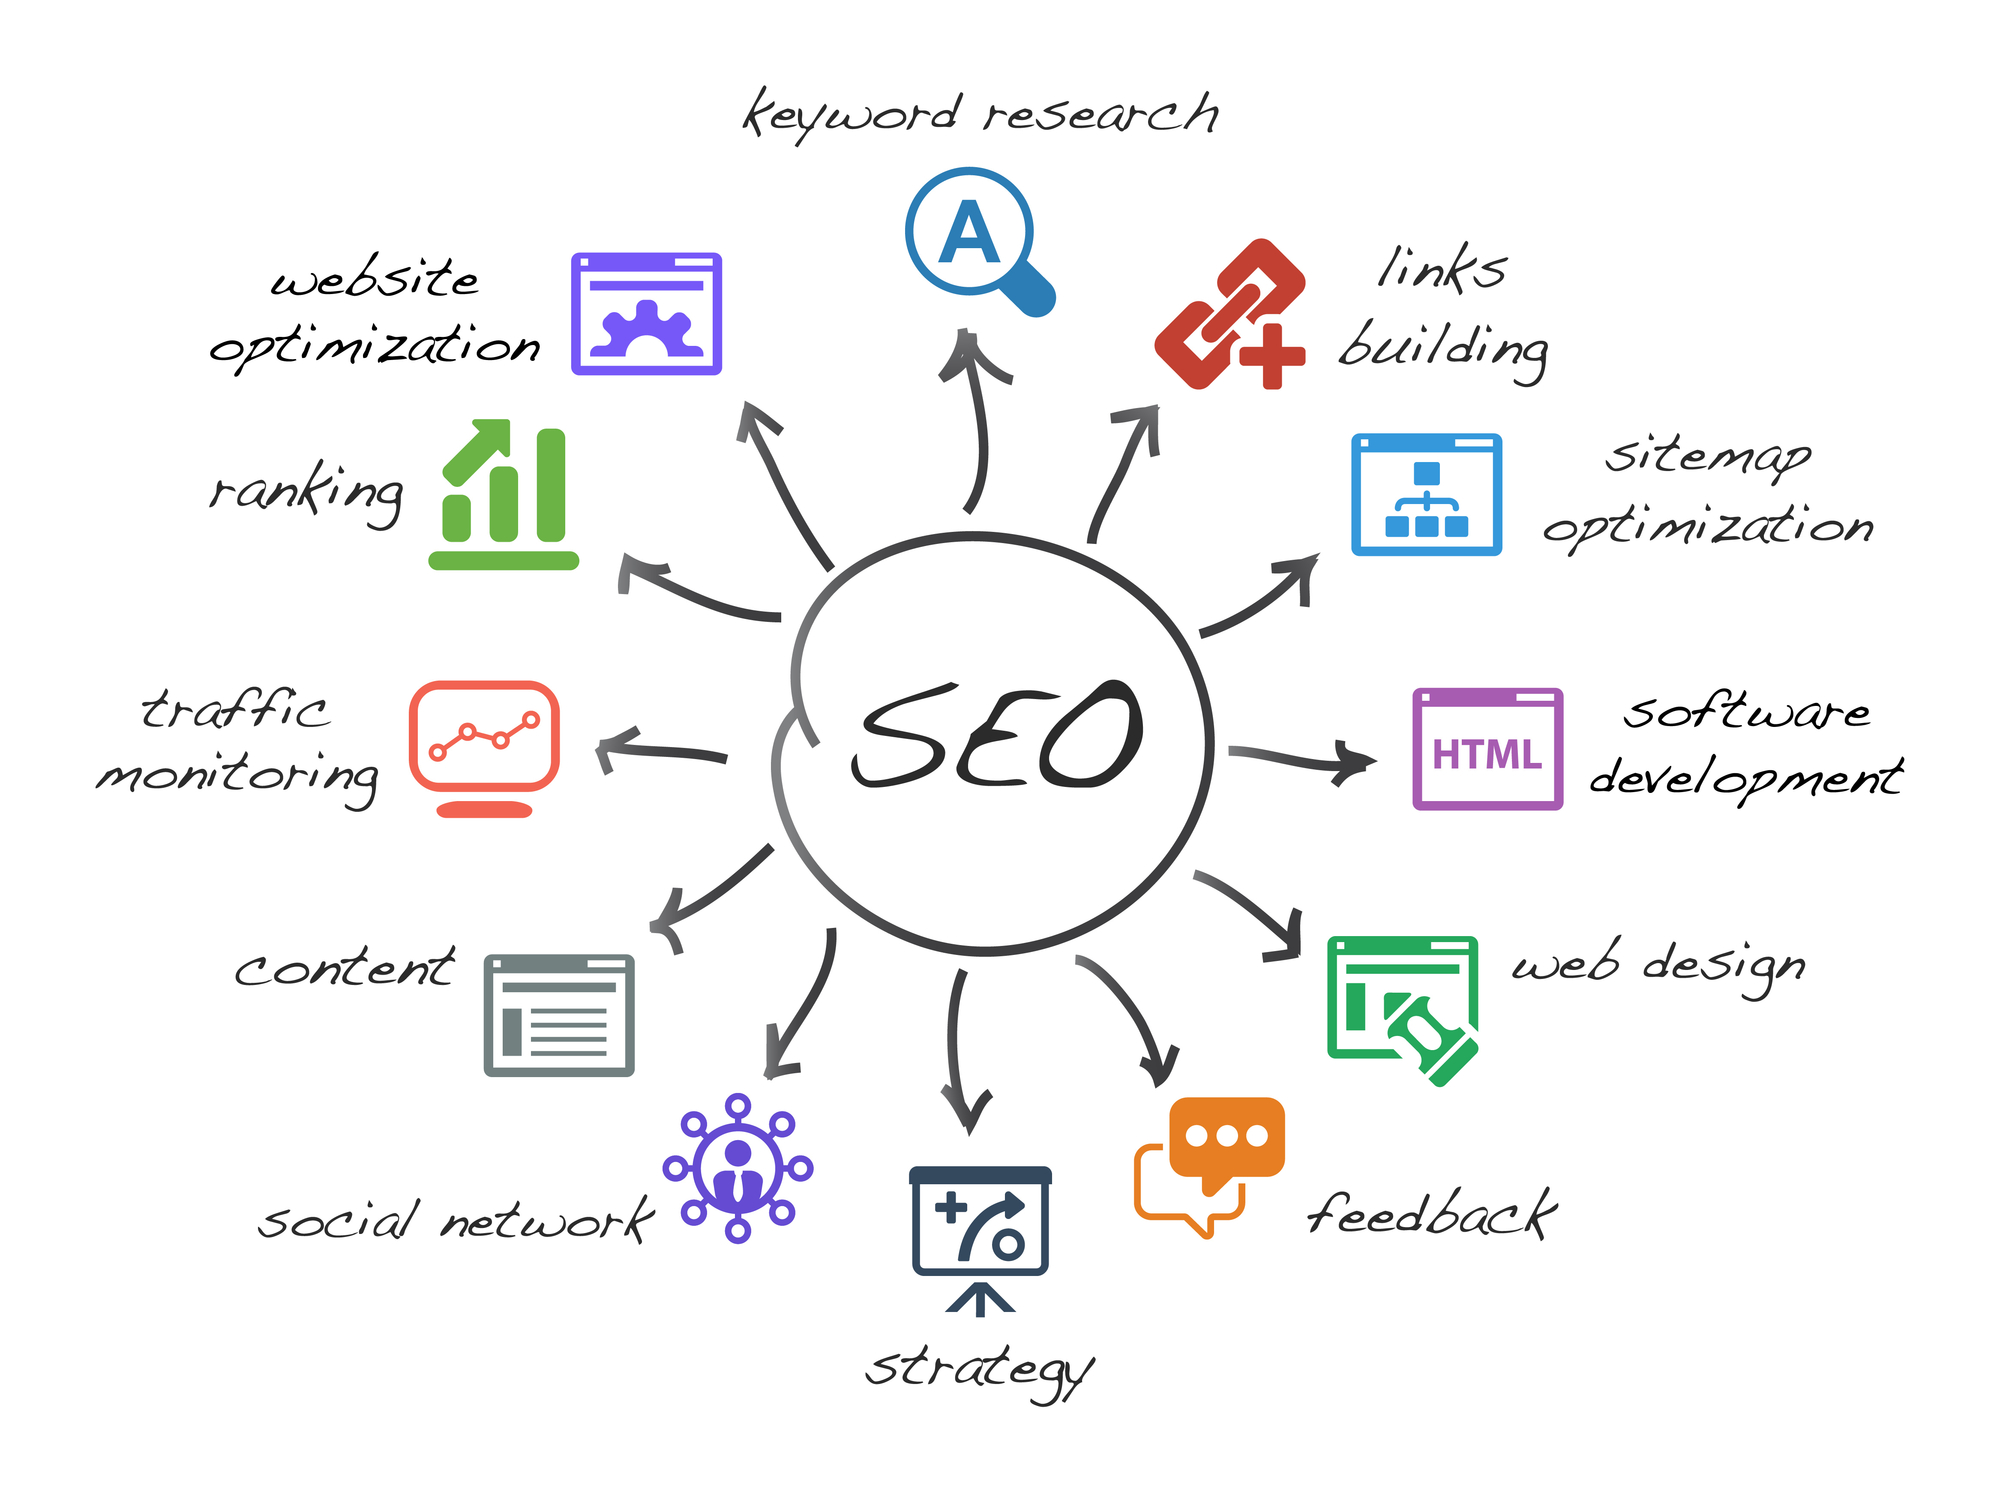 Importance of SEO in digital marketing shown with different arrows, SEO written in the center